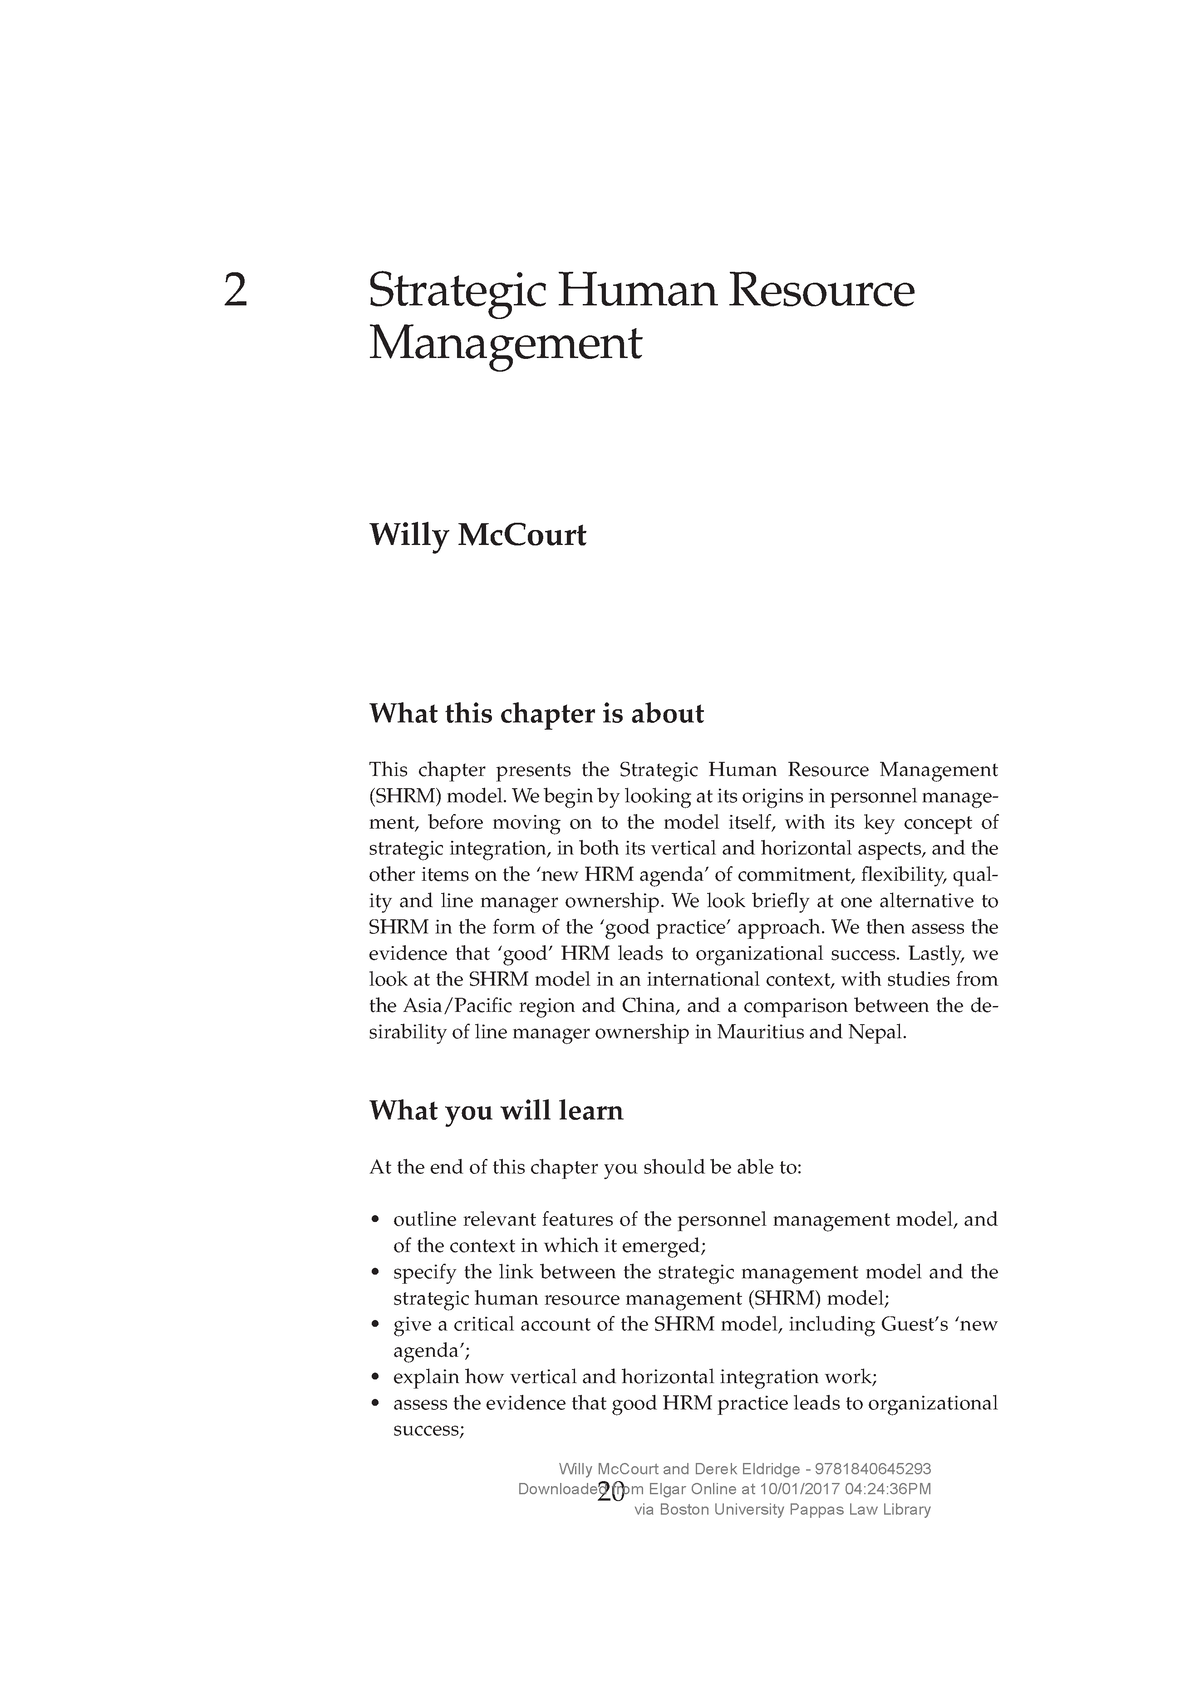 strategic human resource management research paper